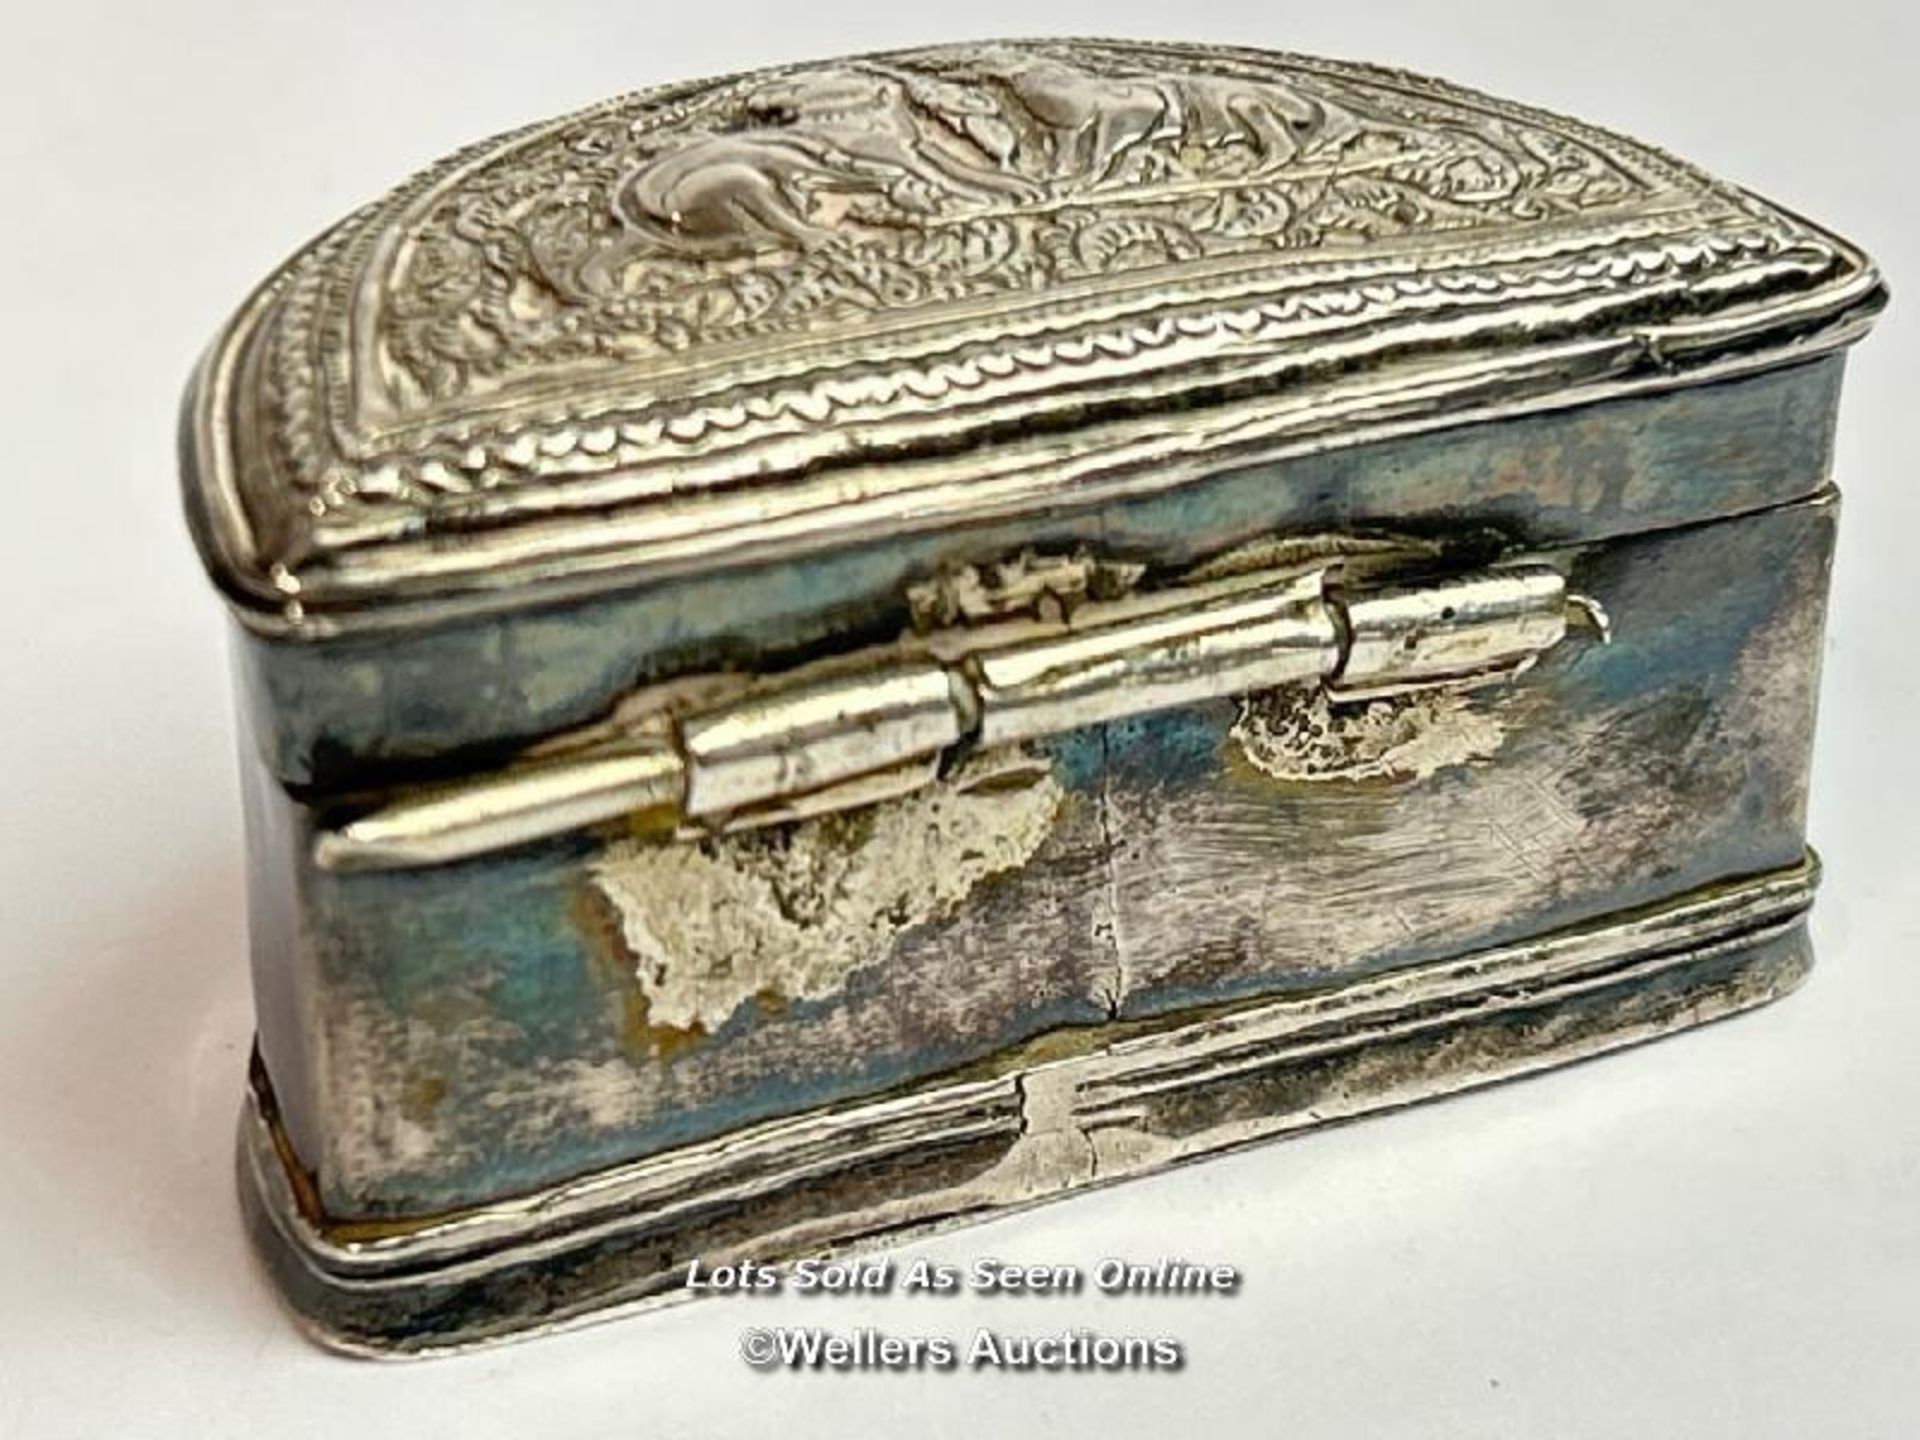 Indian white metal ornate snuff box, 6cm wide, 48g / SF - Image 3 of 4